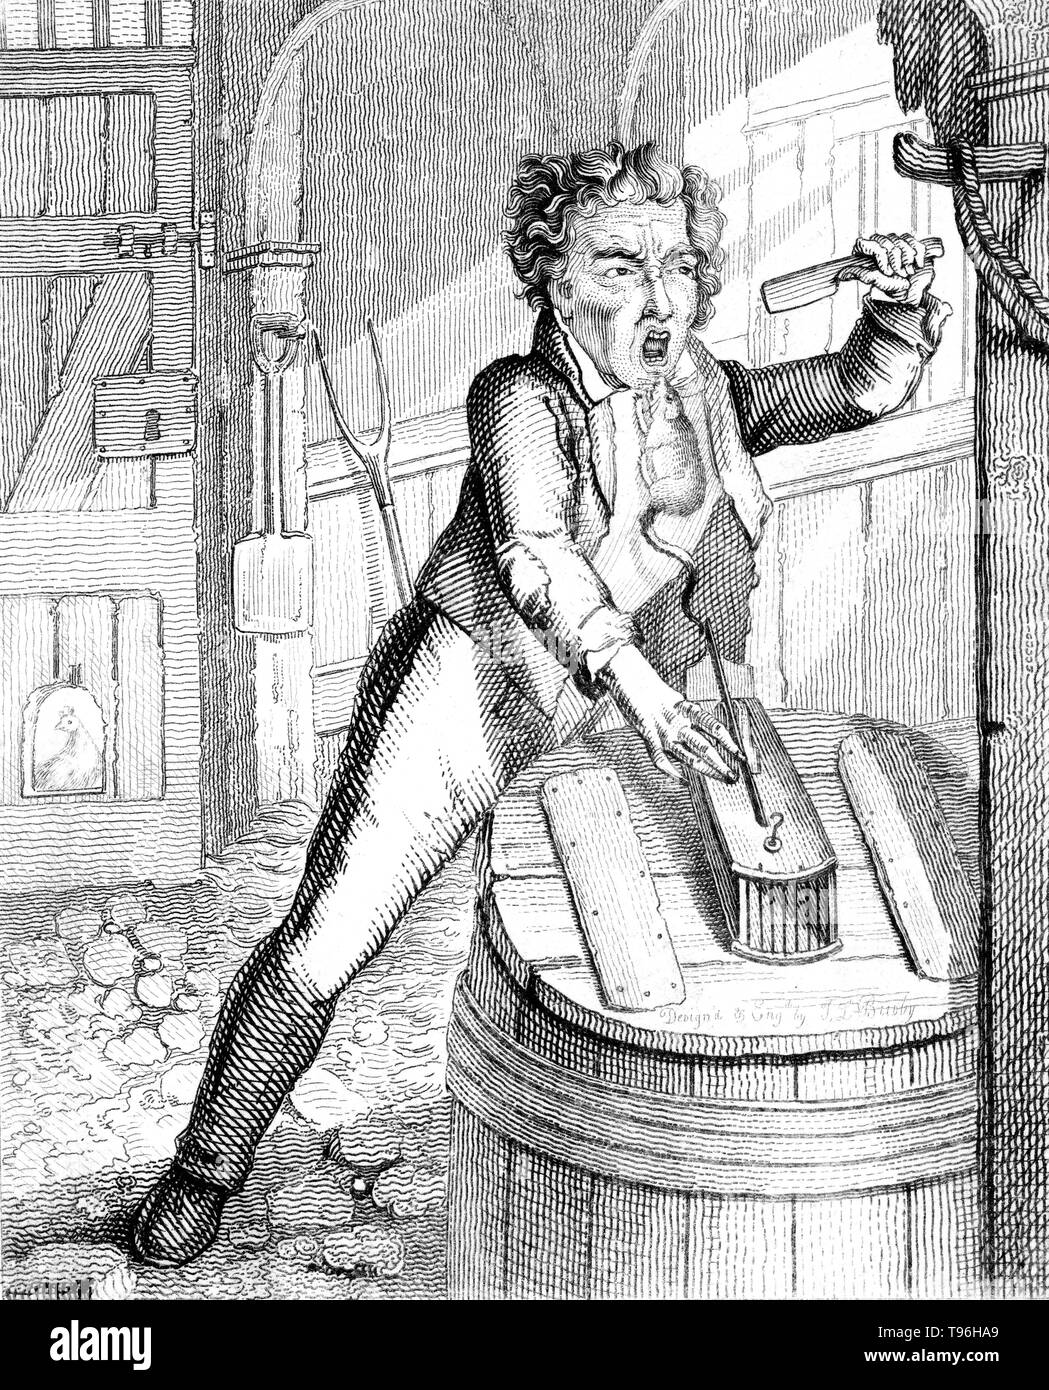 A man goes into a barn and opens a rat trap; a rat jumps put and bites him on the chin. Rat-catchers may attempt to capture rats themselves, or release ratters, animals trained or naturally skilled at catching them. They may also set a rat trap or other traps. Etching by Thomas Lord Busby, 1826. Stock Photo